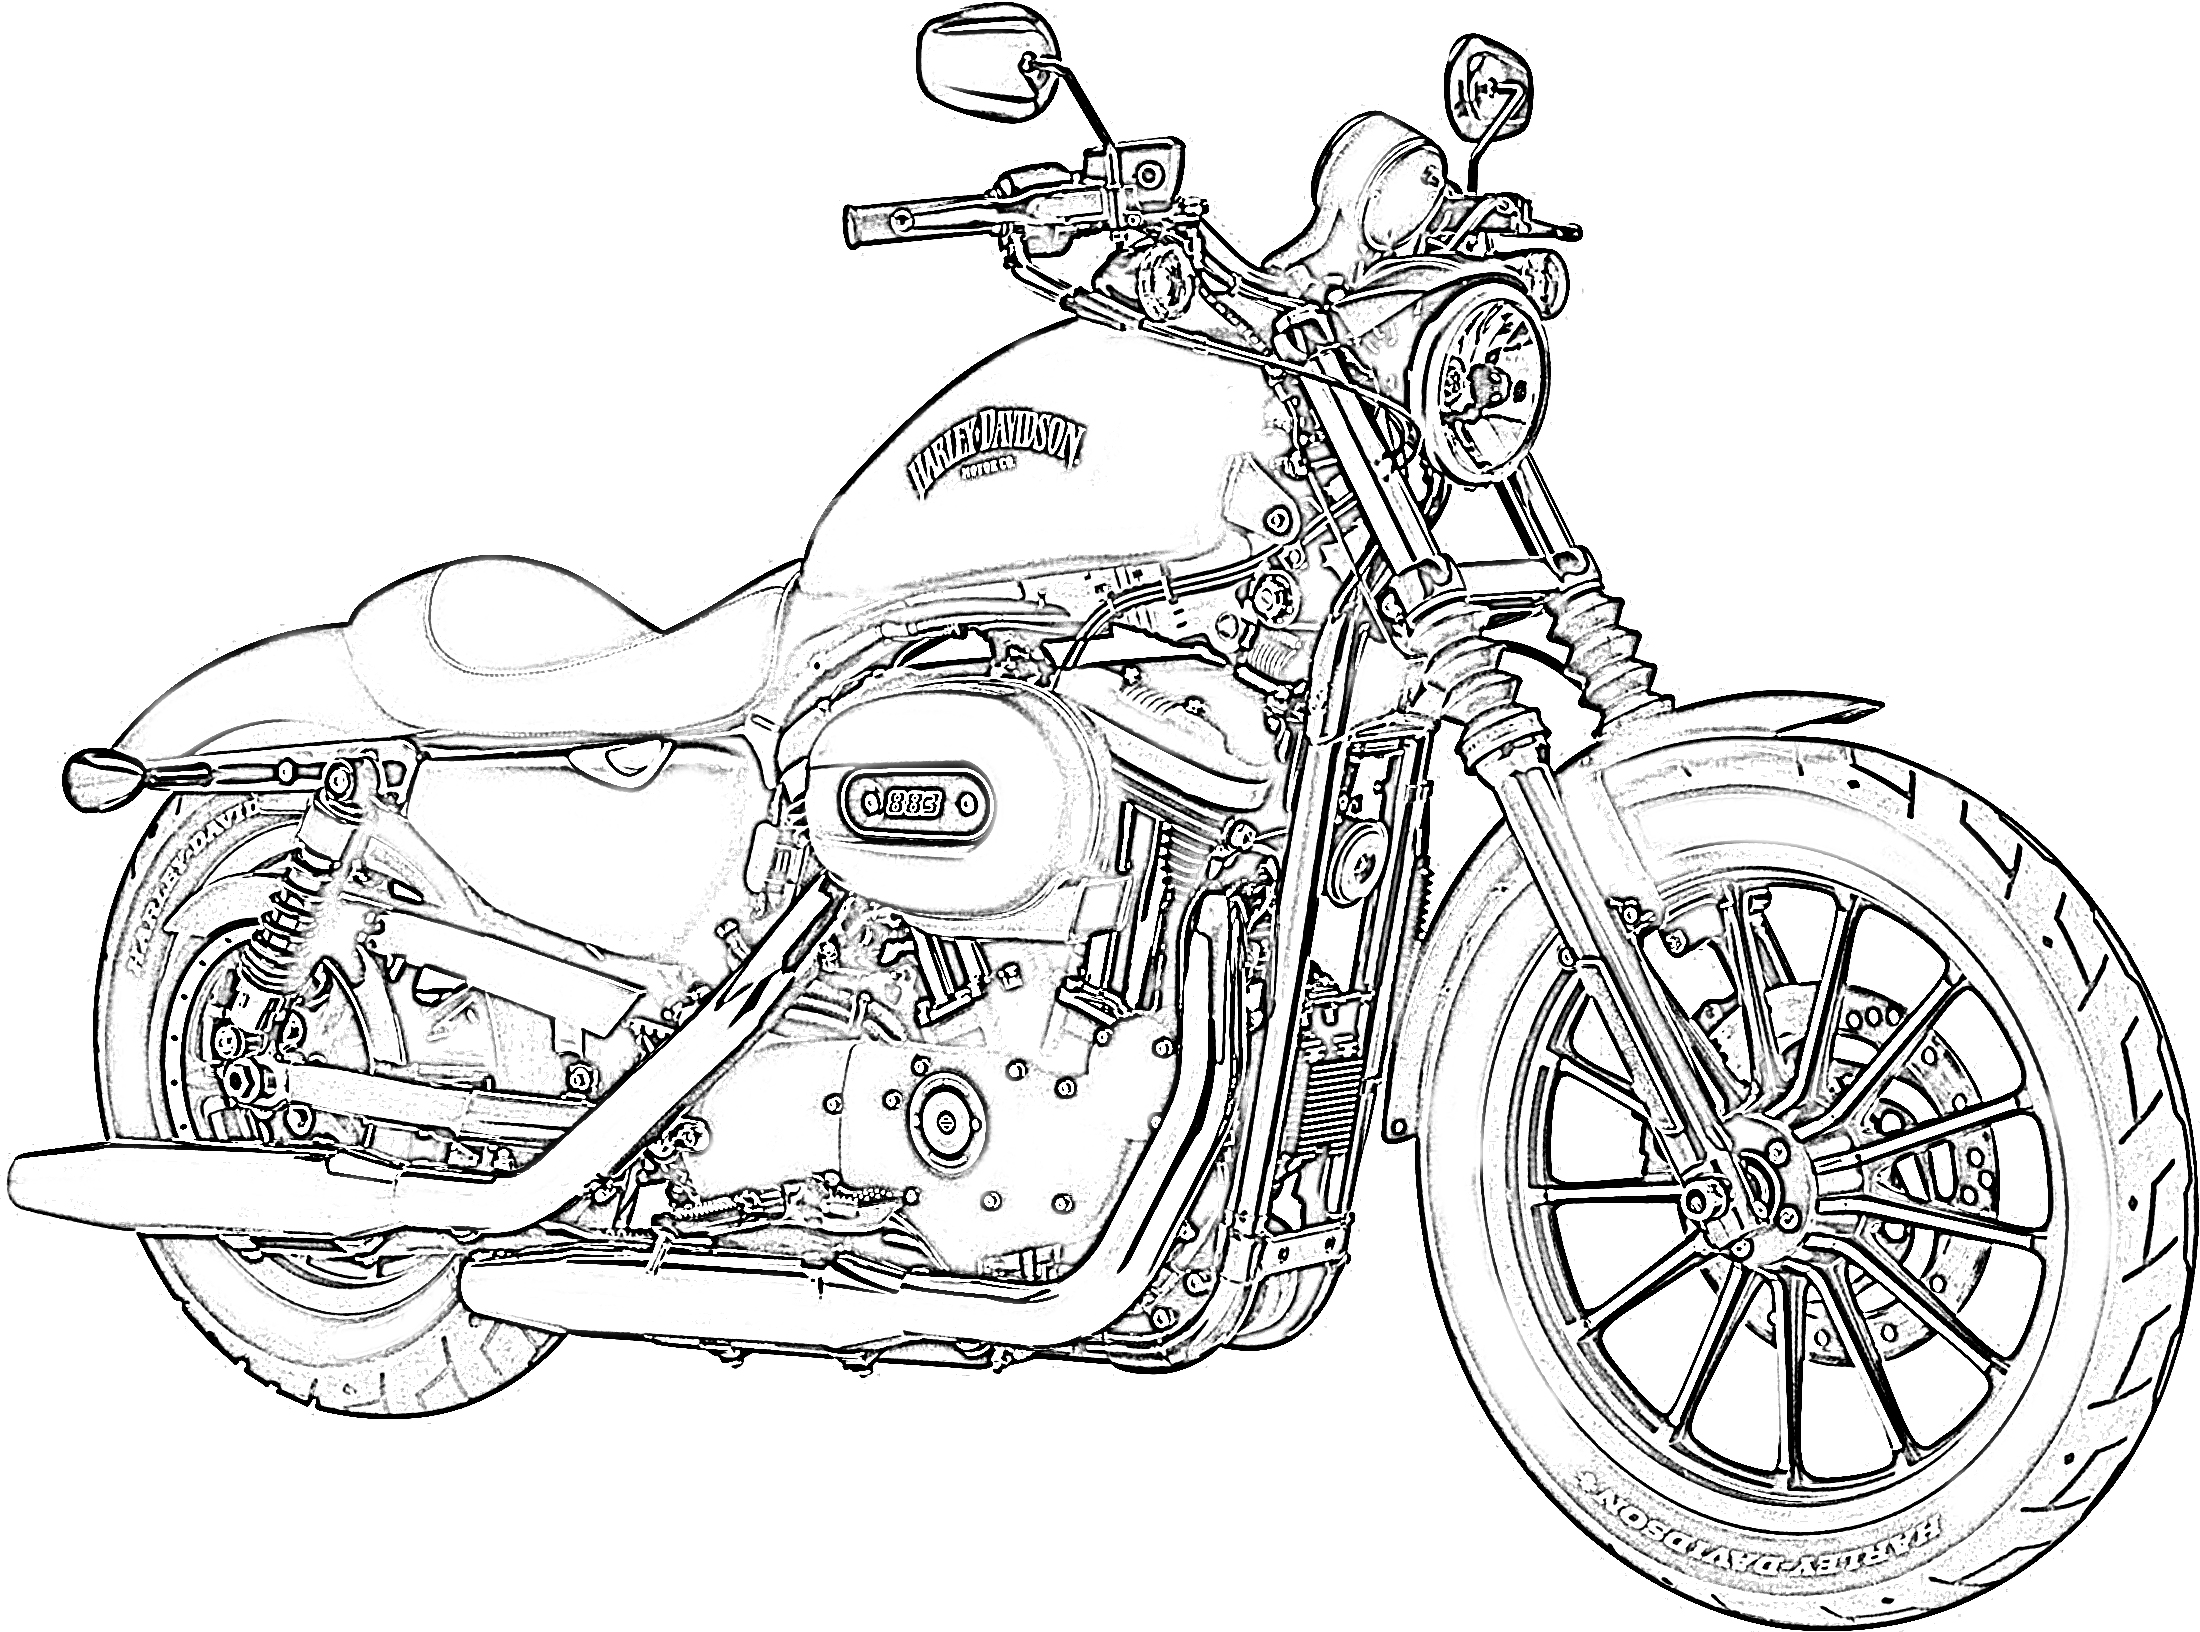 Motorcycle Coloring Pages To Download And Print For Free Sketch